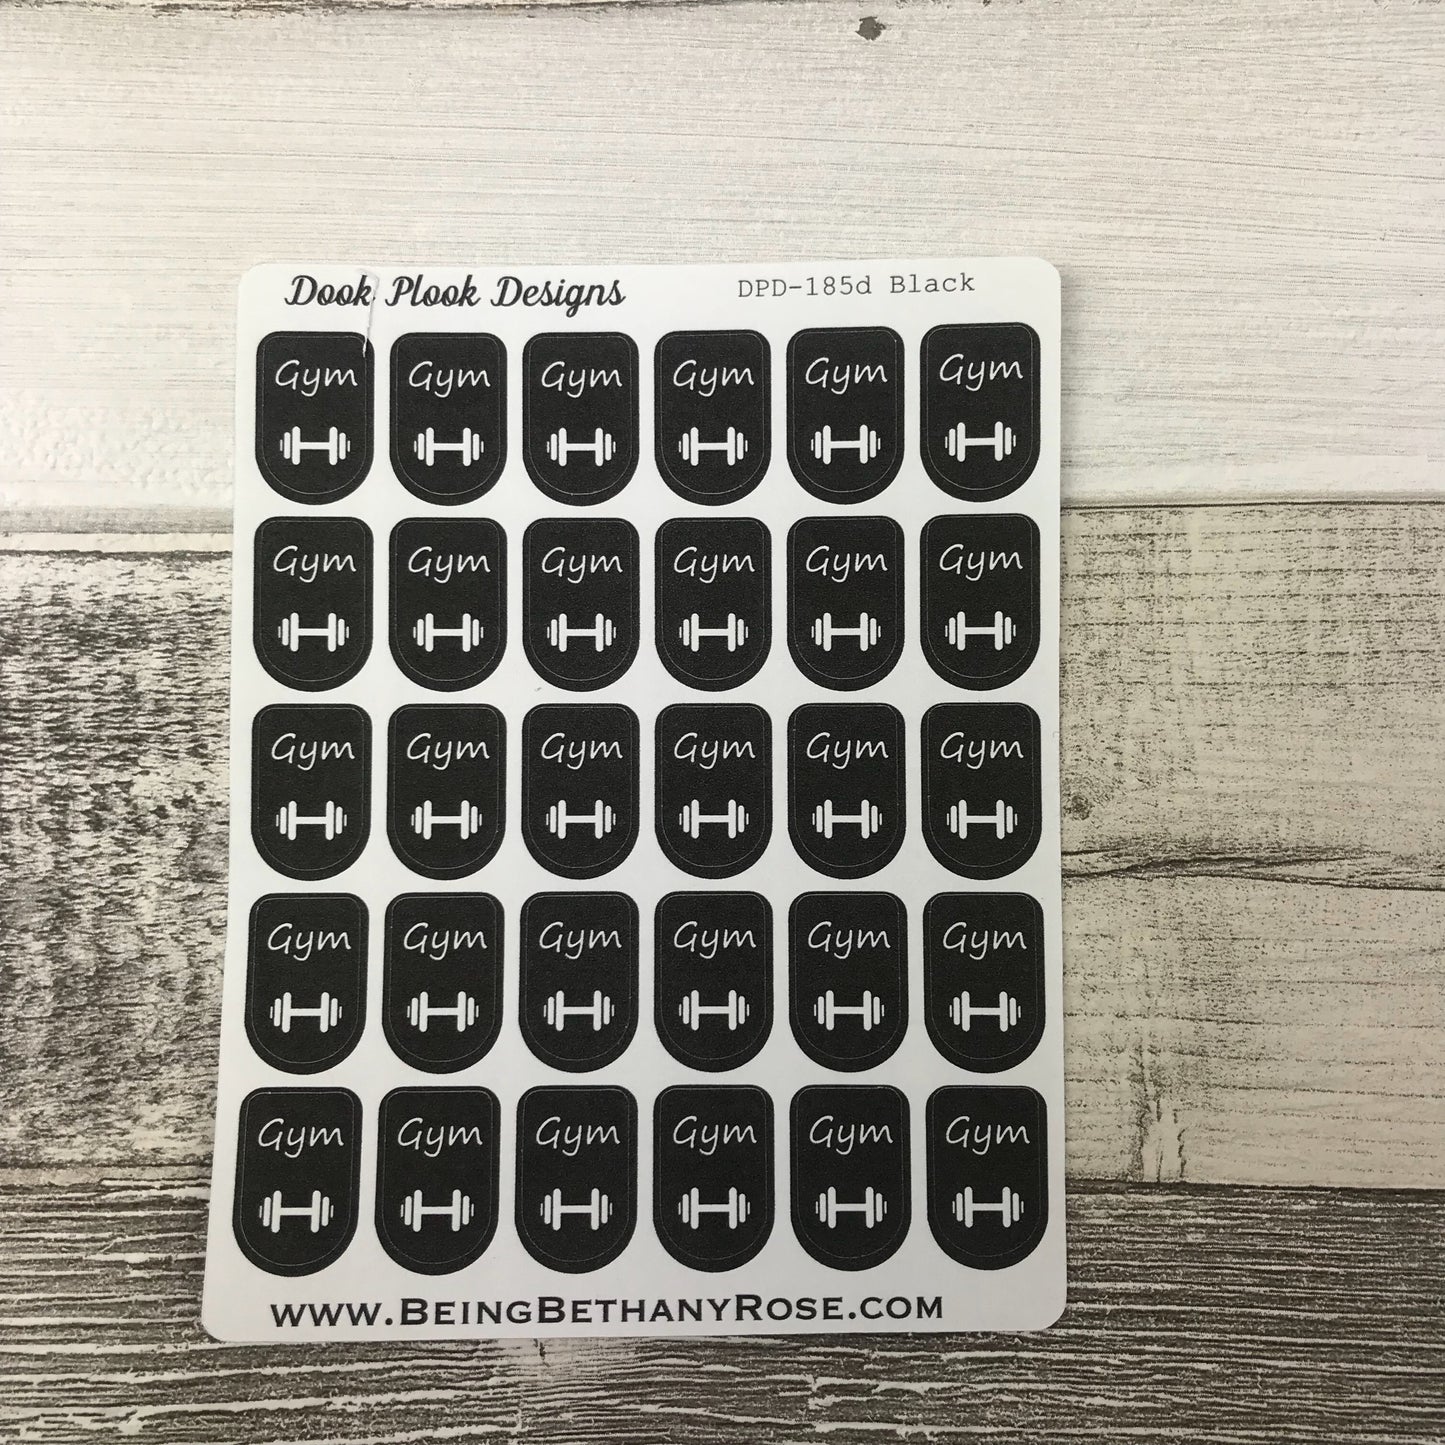 Gym workout stickers (DPD 185)